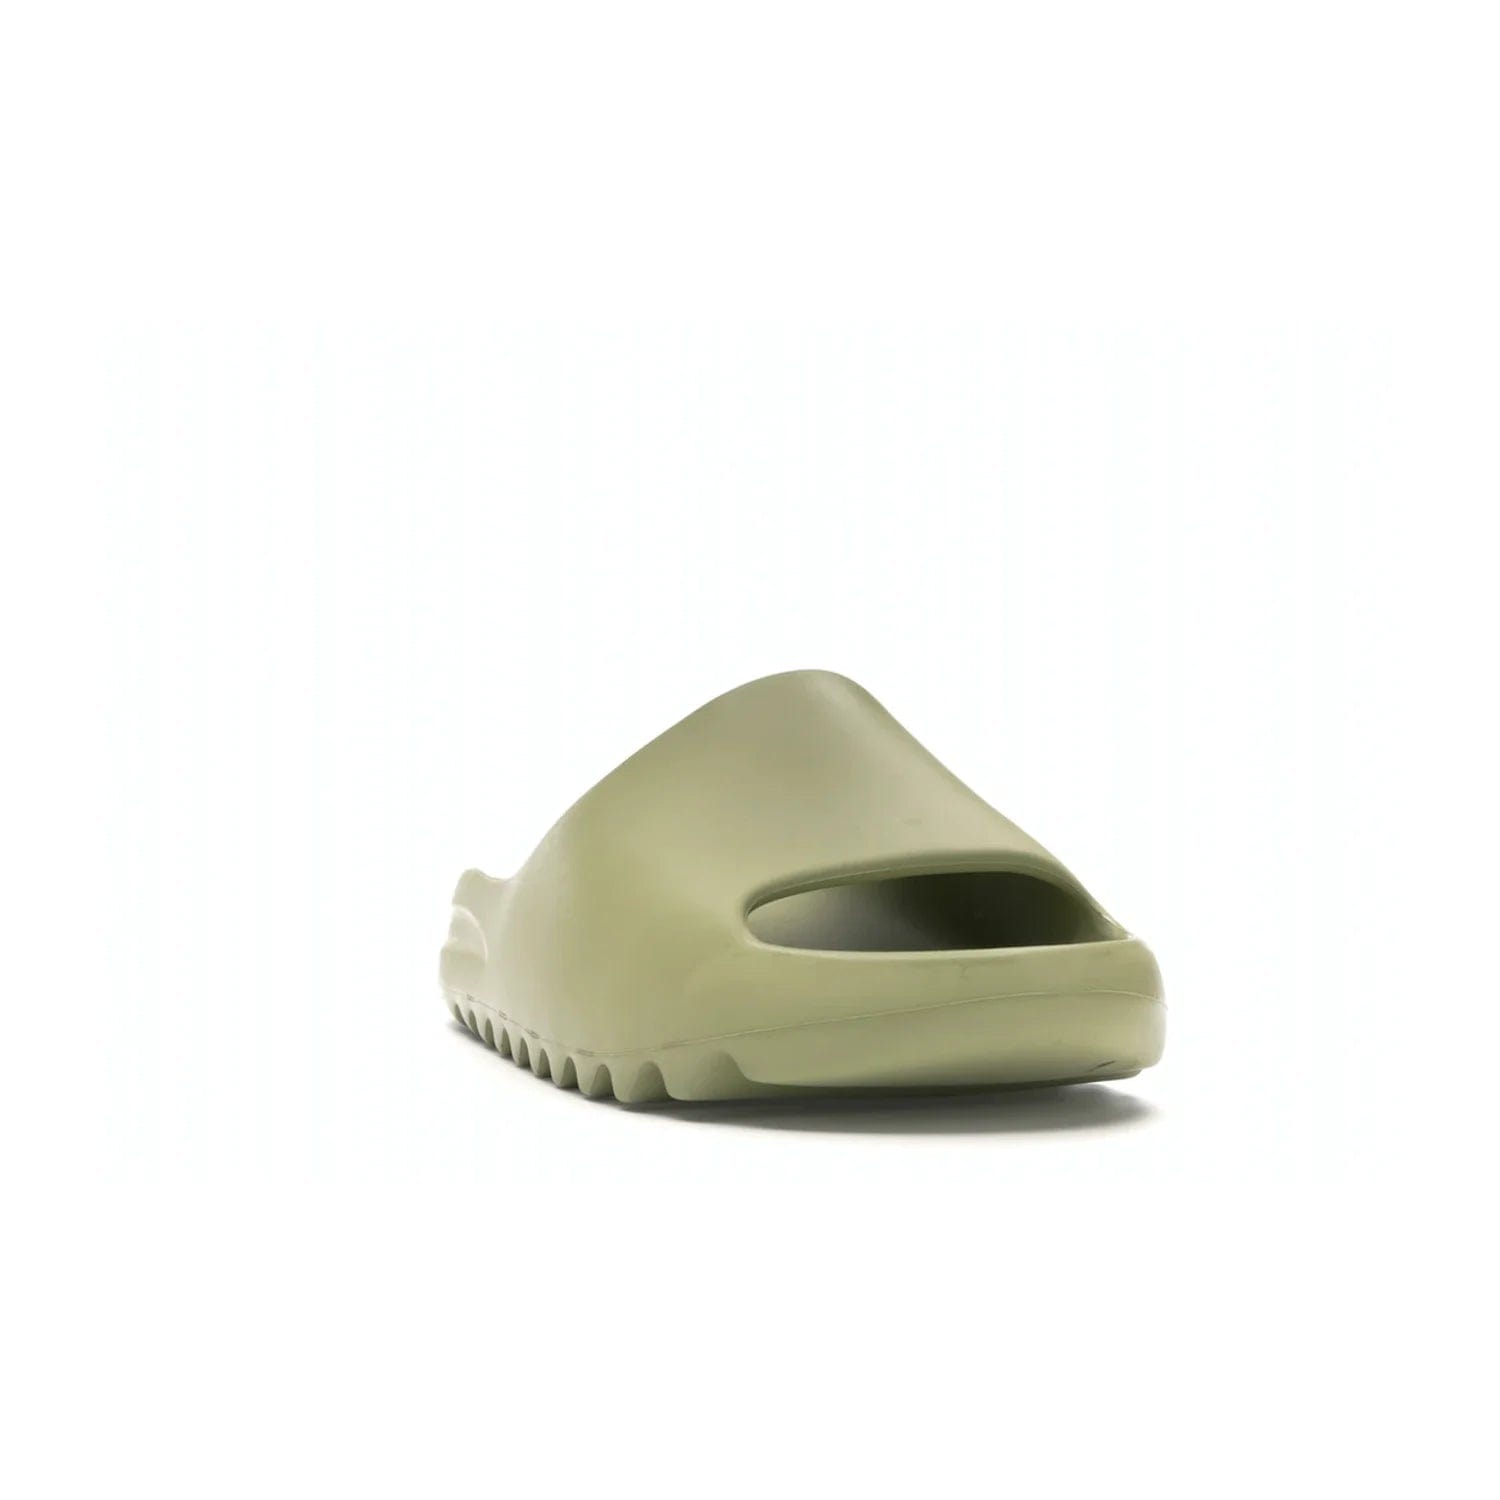 adidas Yeezy Slide Resin (2019/2021) - Image 8 - Only at www.BallersClubKickz.com - Step into fashion and function with the adidas Yeezy Slide Resin. Featuring a lightweight Resin EVA foam construction and an outsole with accentuated grooves for traction and support. The latest release is available in a Resin/Resin/Resin colorway, combining modern aesthetics and classic style. Step into style with the adidas Yeezy Slide Resin and be the trend-setter this season.